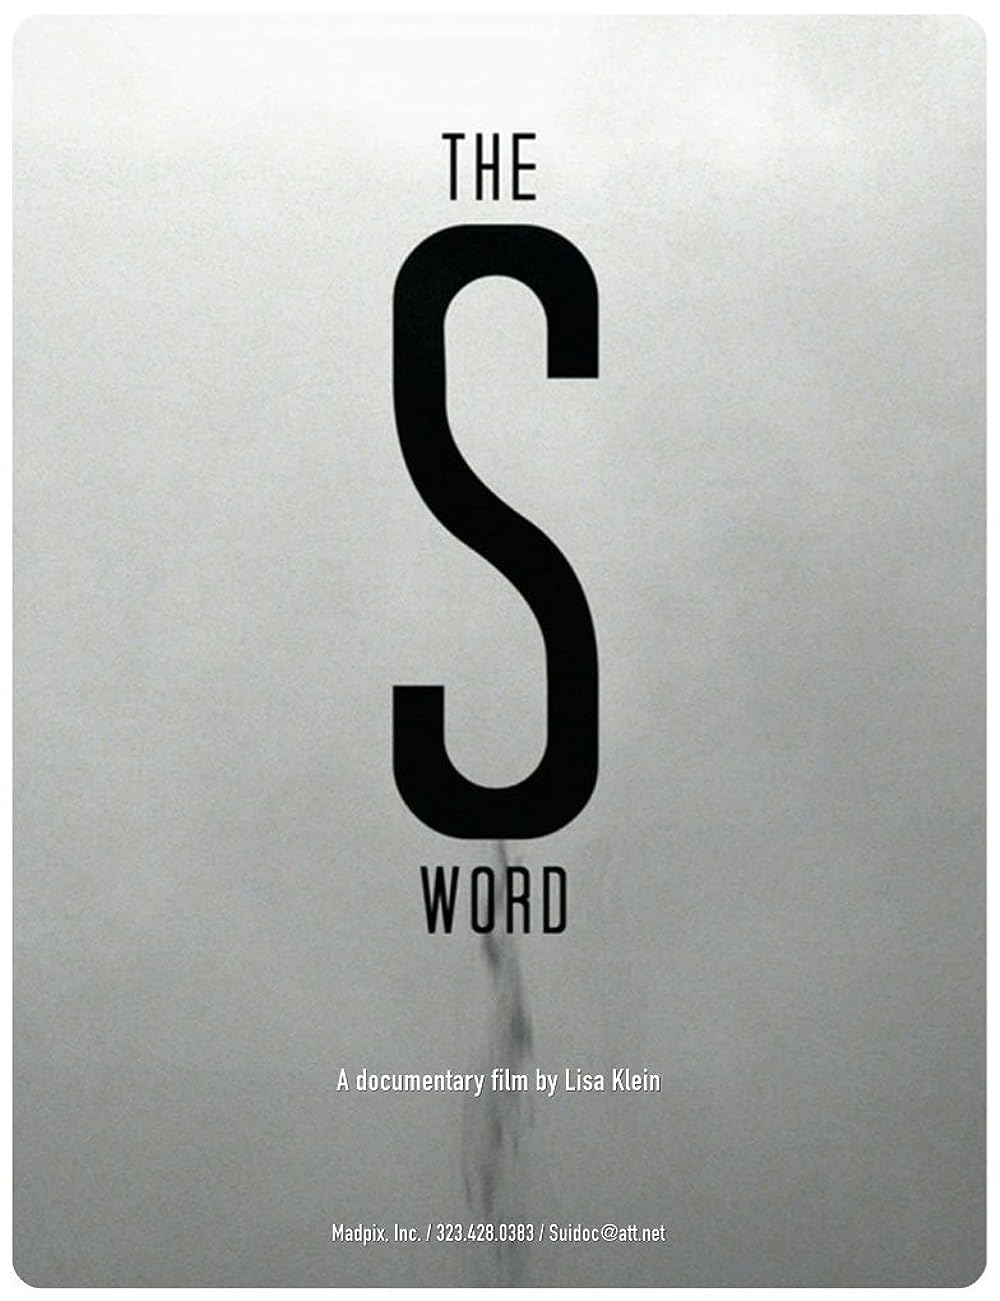 The "S" Word Film Poster that features a large letter "S" in the center. The words "The" and "Word" are much smaller and displayed vertically. They each flank the large letter on either side.